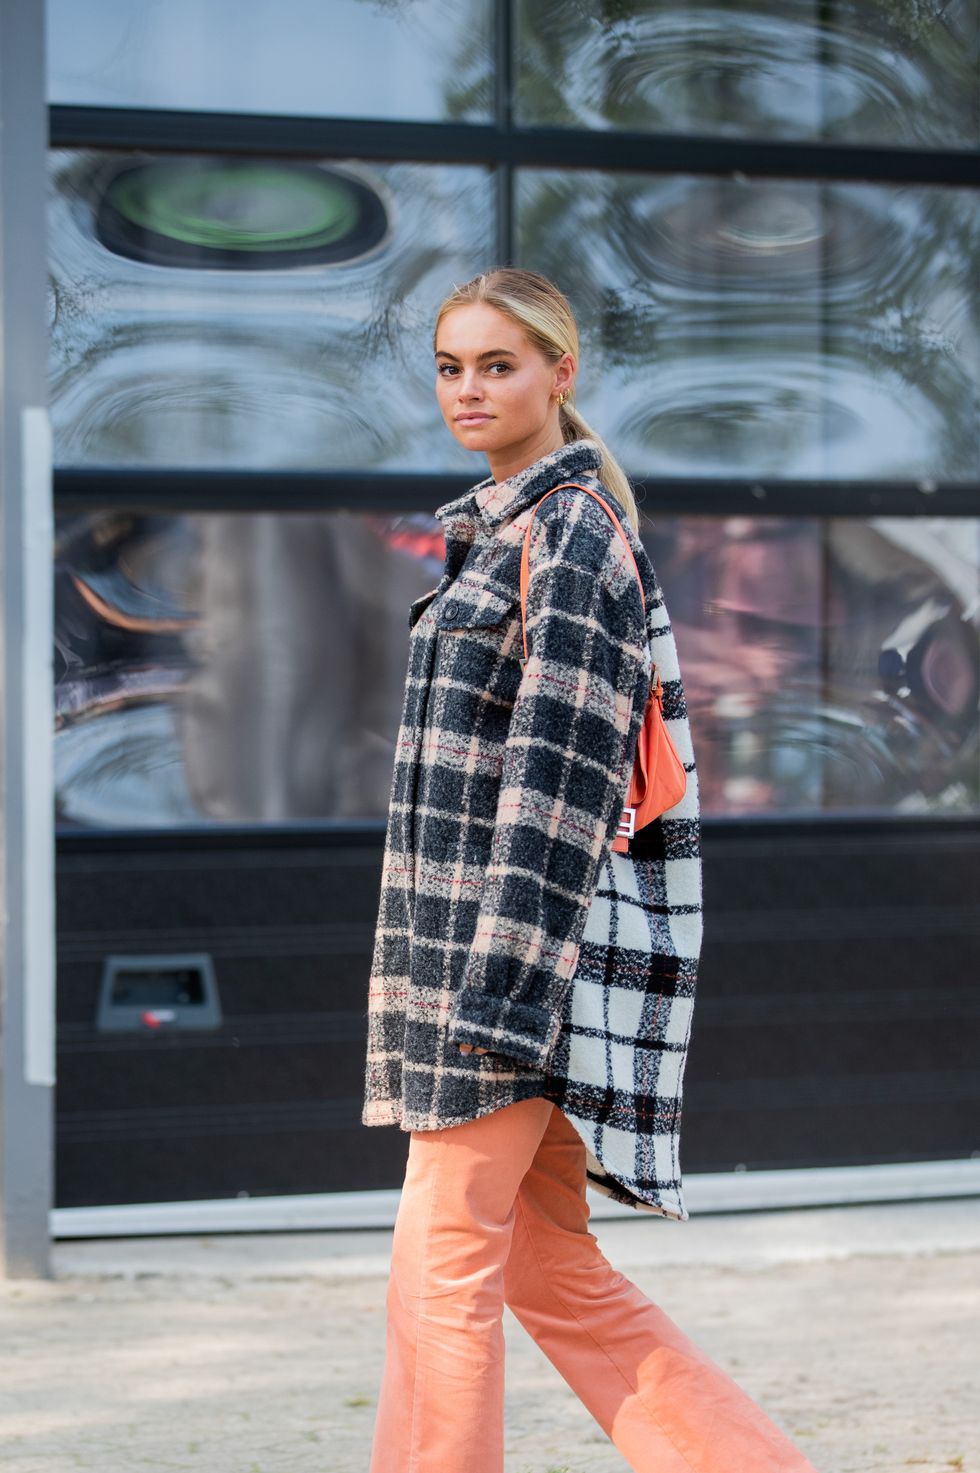 How to Style a Flannel Like a Fashion Editor - PureWow